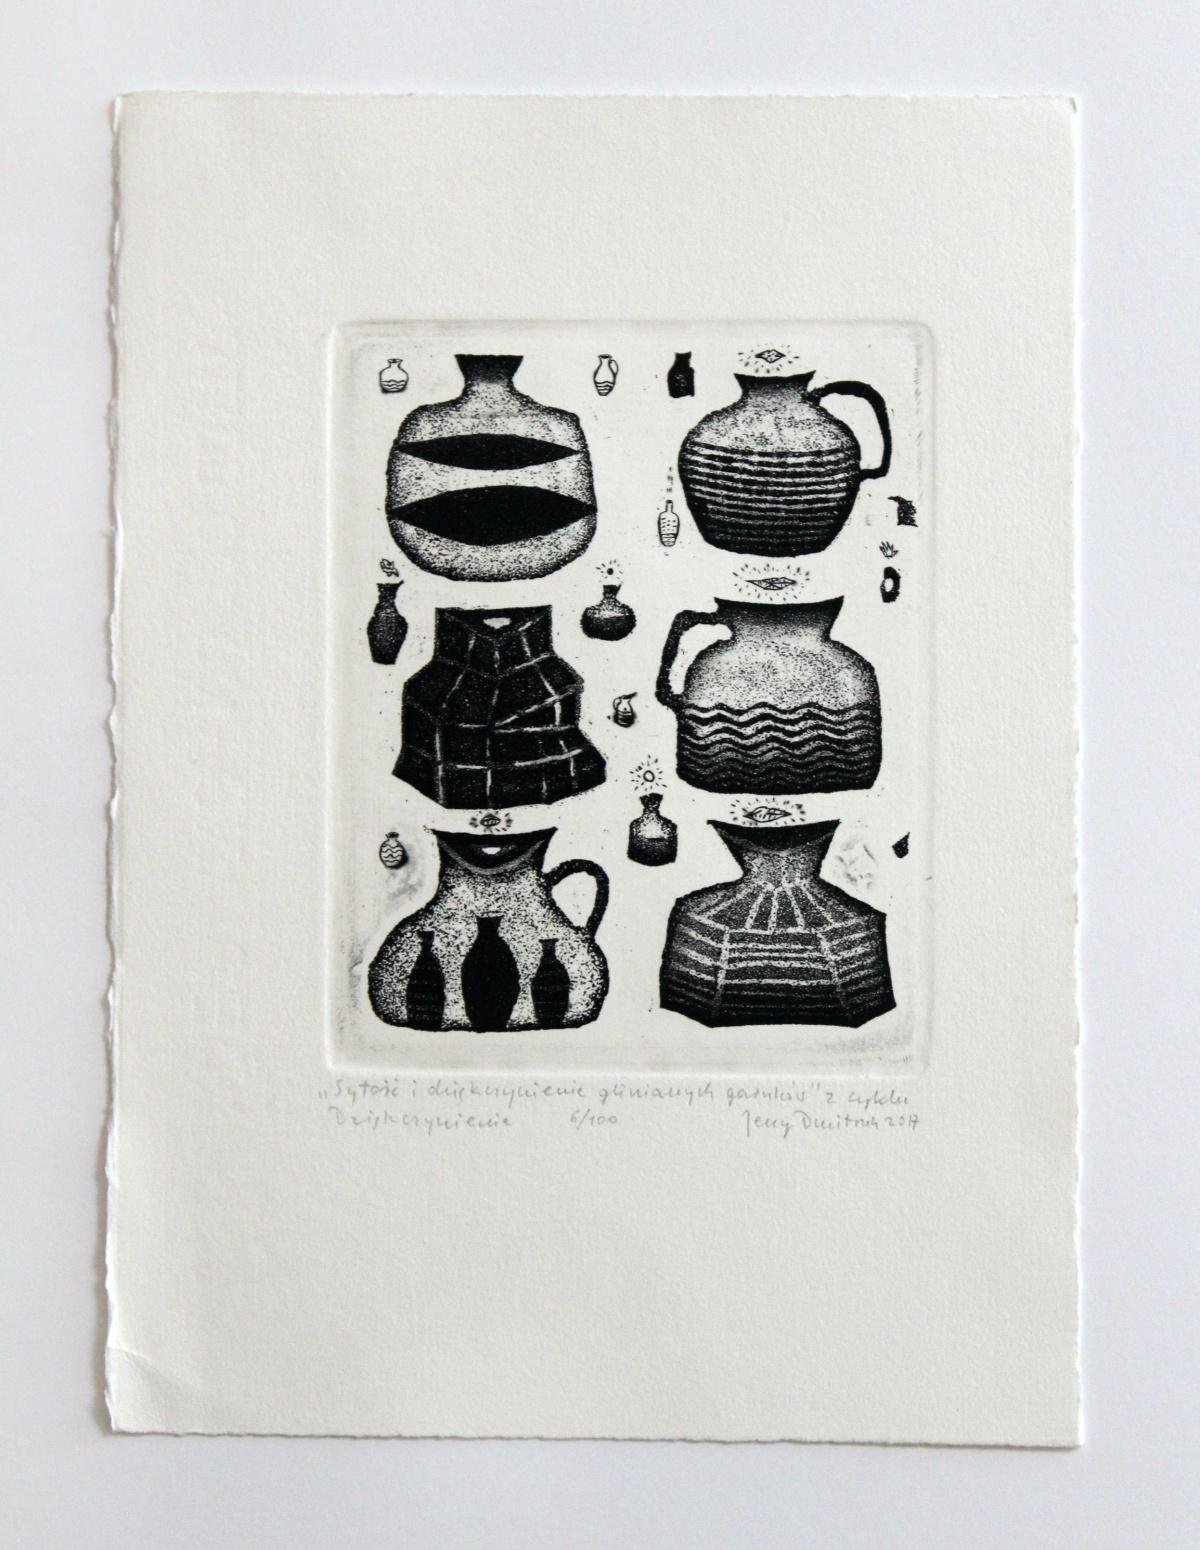 Satiety and thanksgiving of clay pots - XXI century, Black and white etching - Other Art Style Print by Jerzy Dmitruk